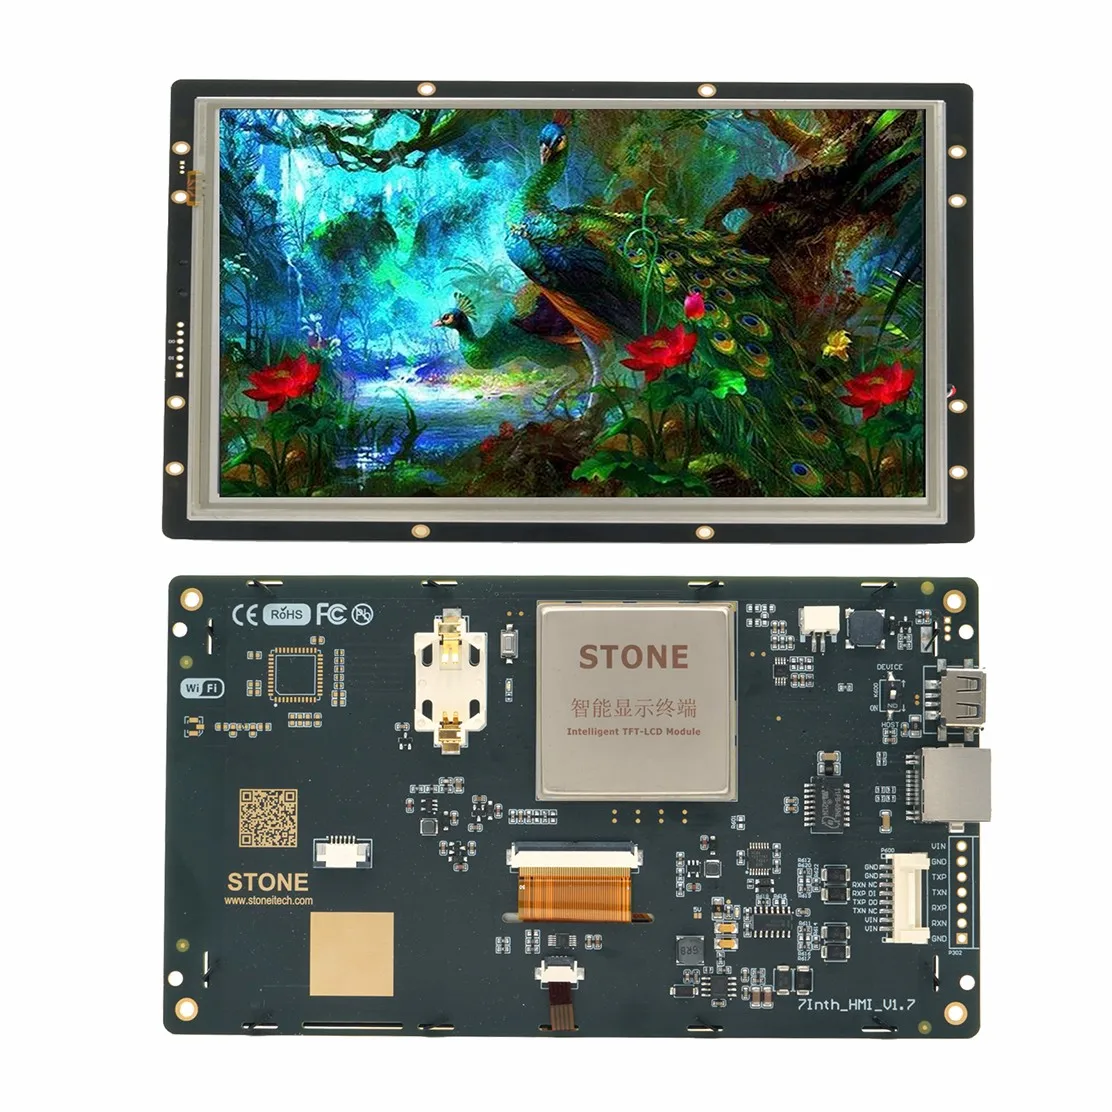 SCBRHMI I Series - 7'' HMI Intelligent Resistive Touch Display TFT LCD Full-color Module Support STONE Editor